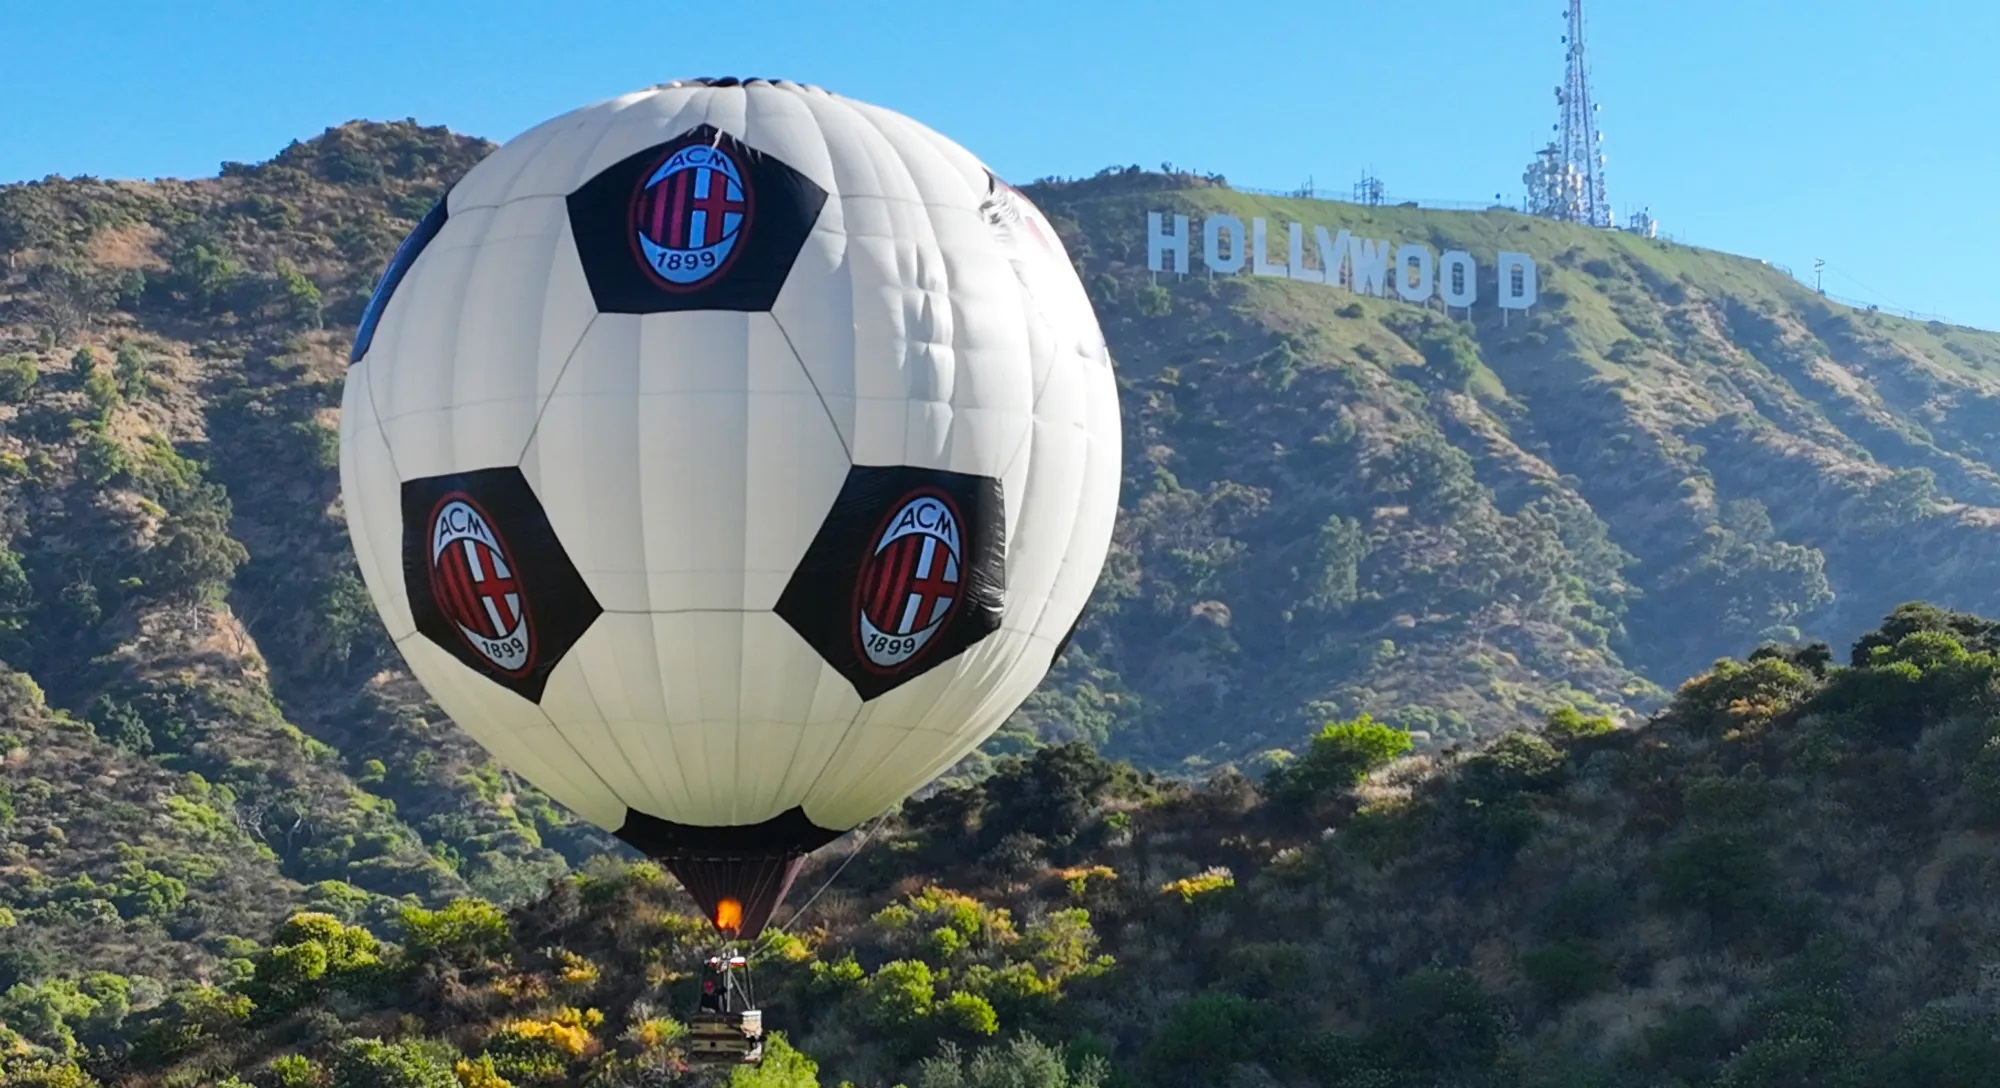 AC Milan surprises Los Angeles with a giant hot air balloon in Hollywood before its preseason